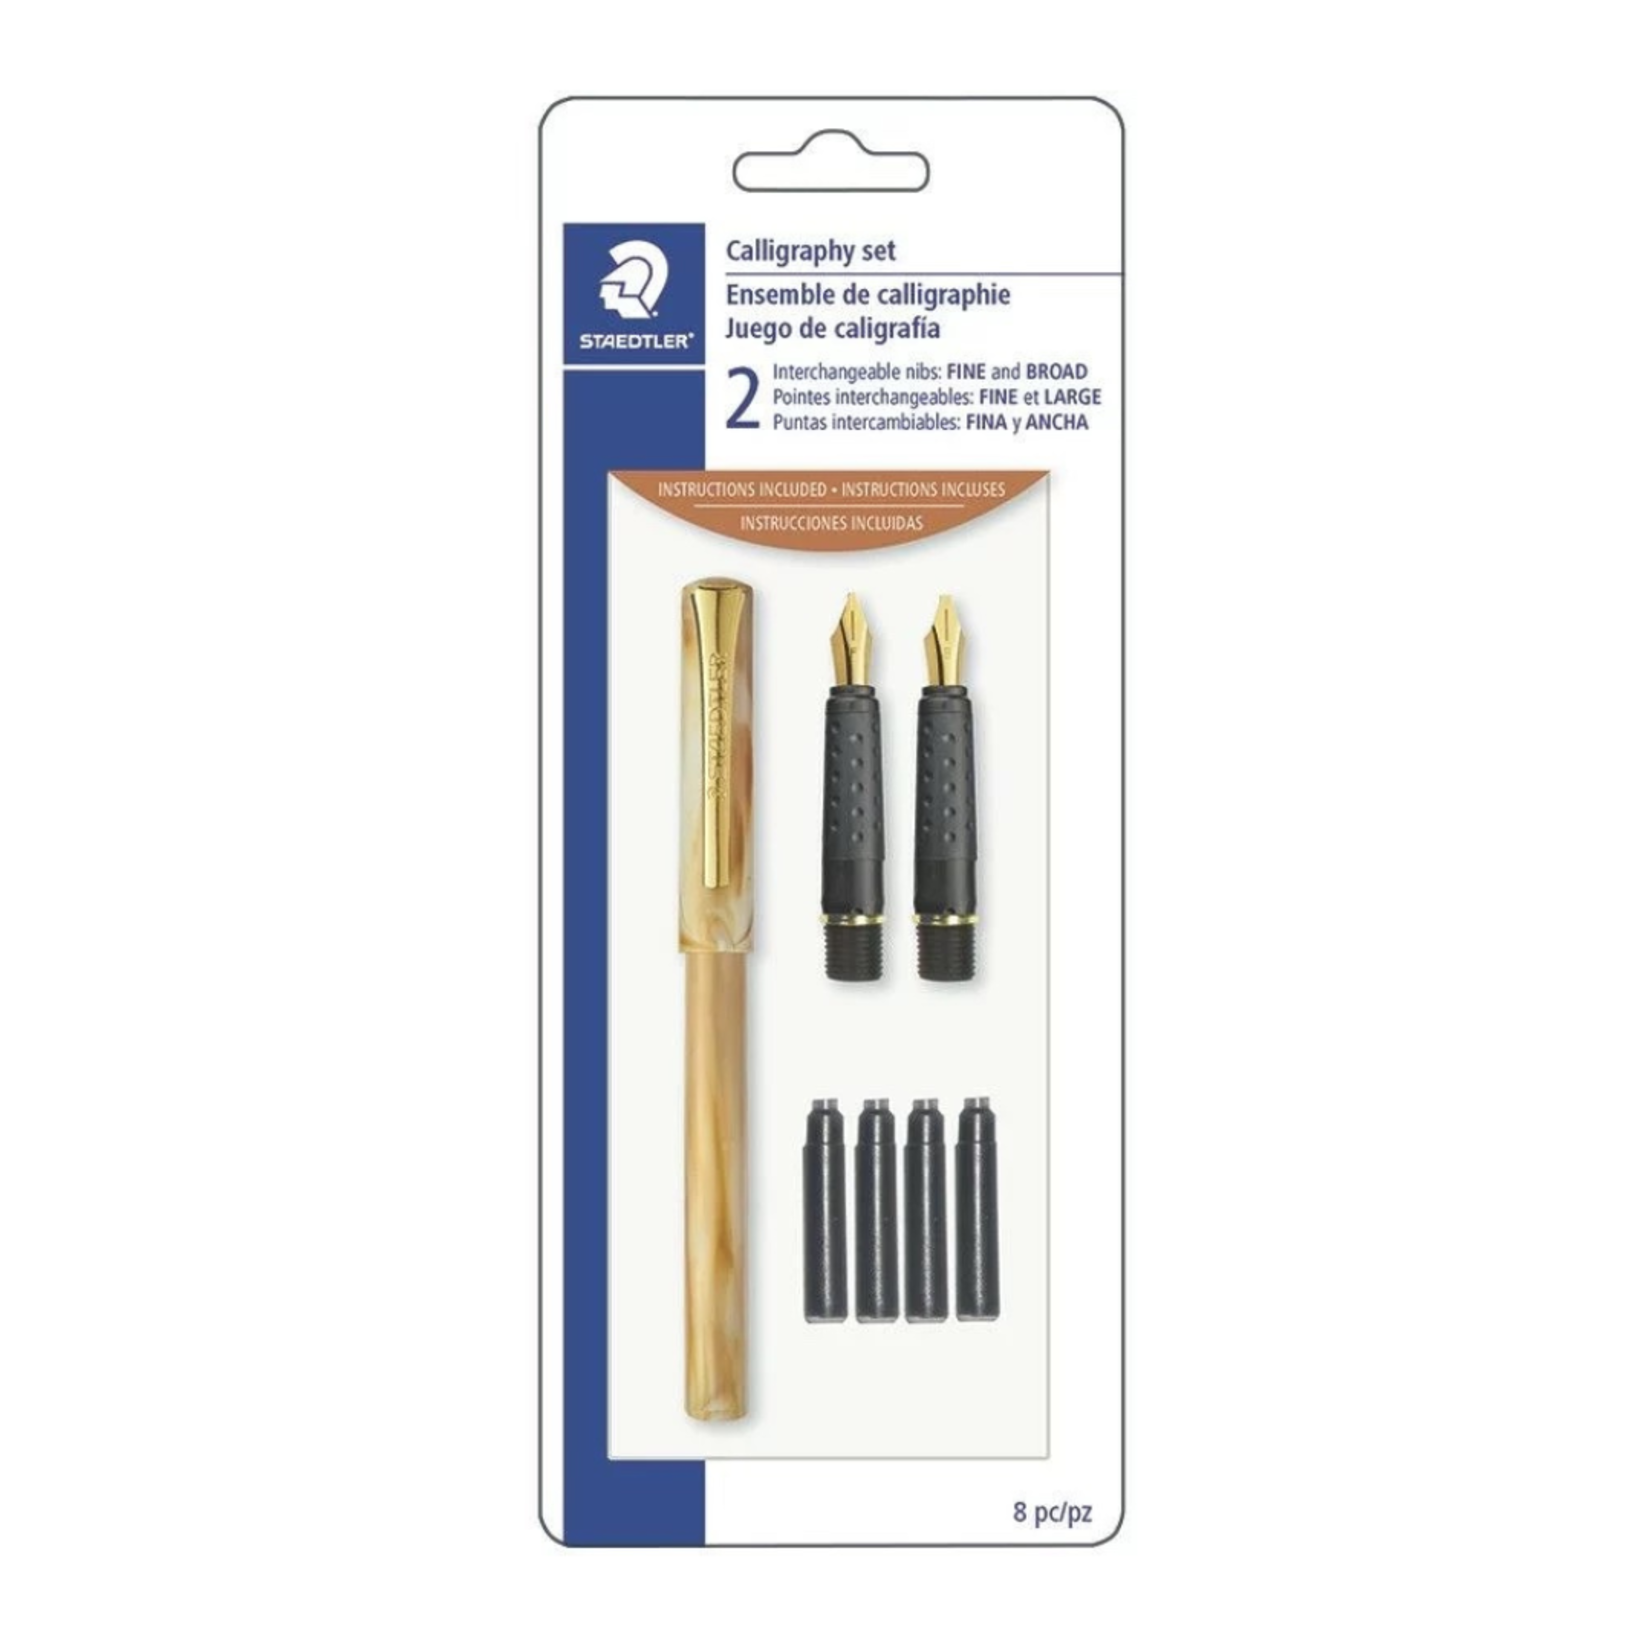 STAEDTLER CALLIGRAPHY SET SMALL 8/PC